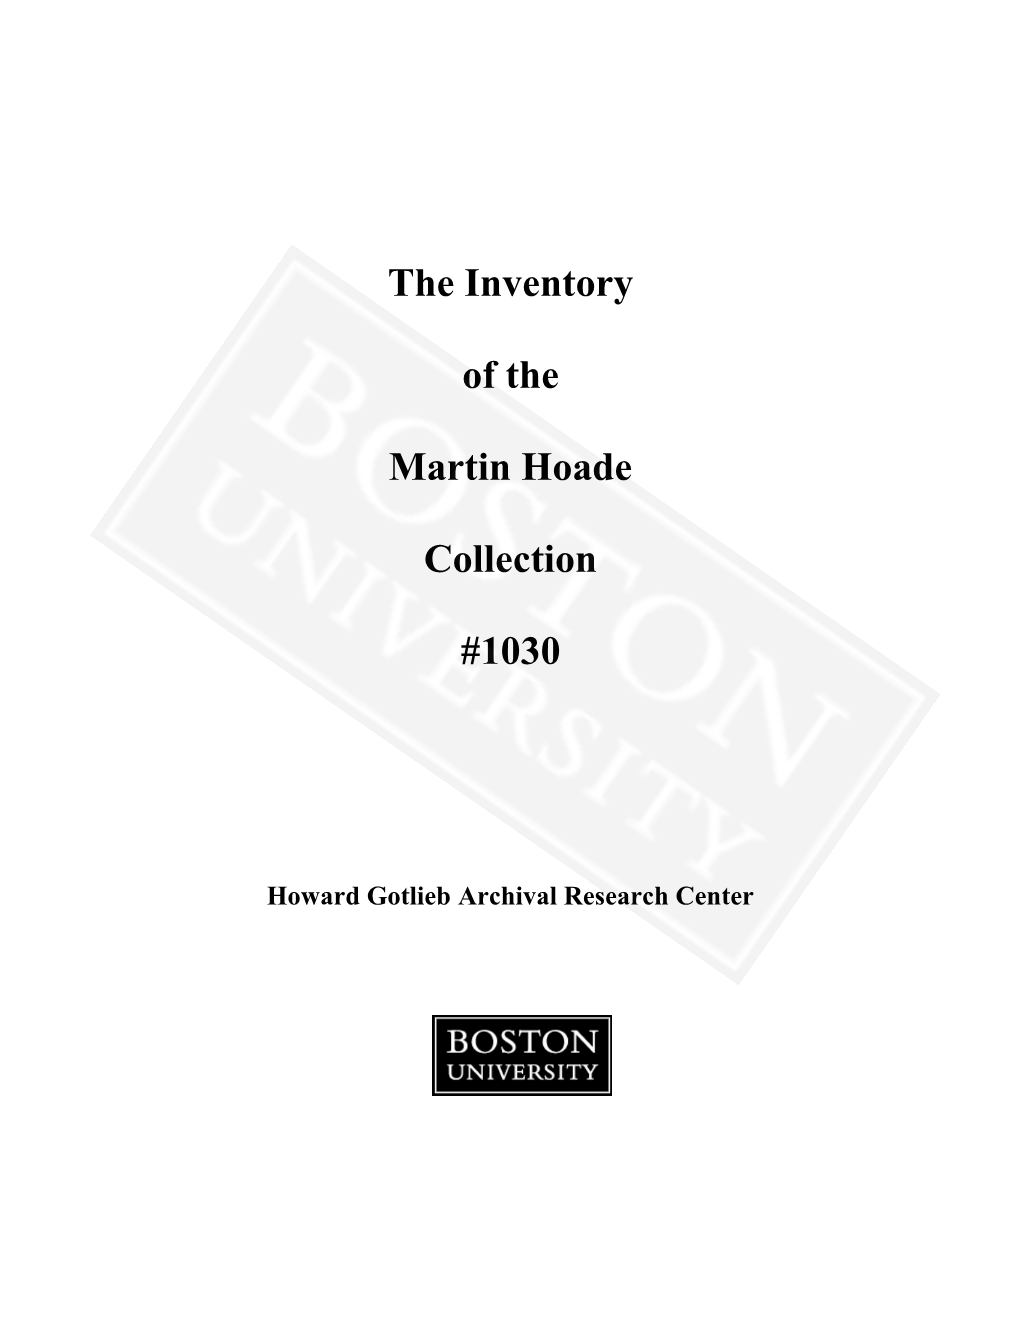 The Inventory of the Martin Hoade Collection #1030